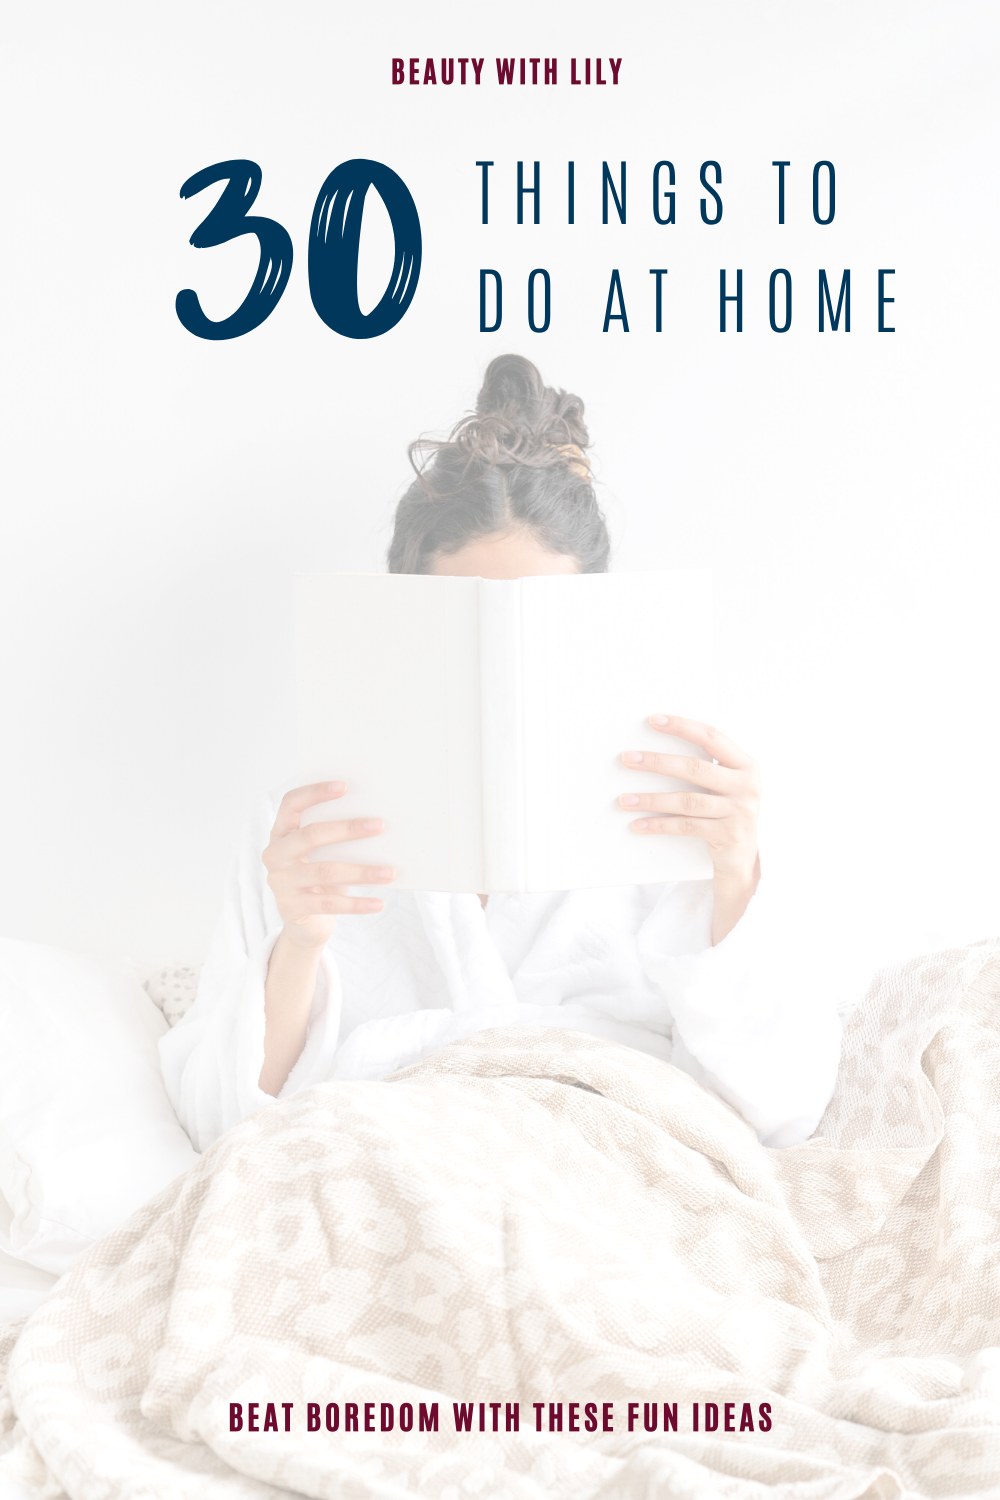 Things To Do At Home // Self-Care Ideas To Do At Home // What To Do When You're Bored // How To Stay Busy // Activities To Do At Home // How To Avoid Being Bored | Beauty With Lily #selfcare 